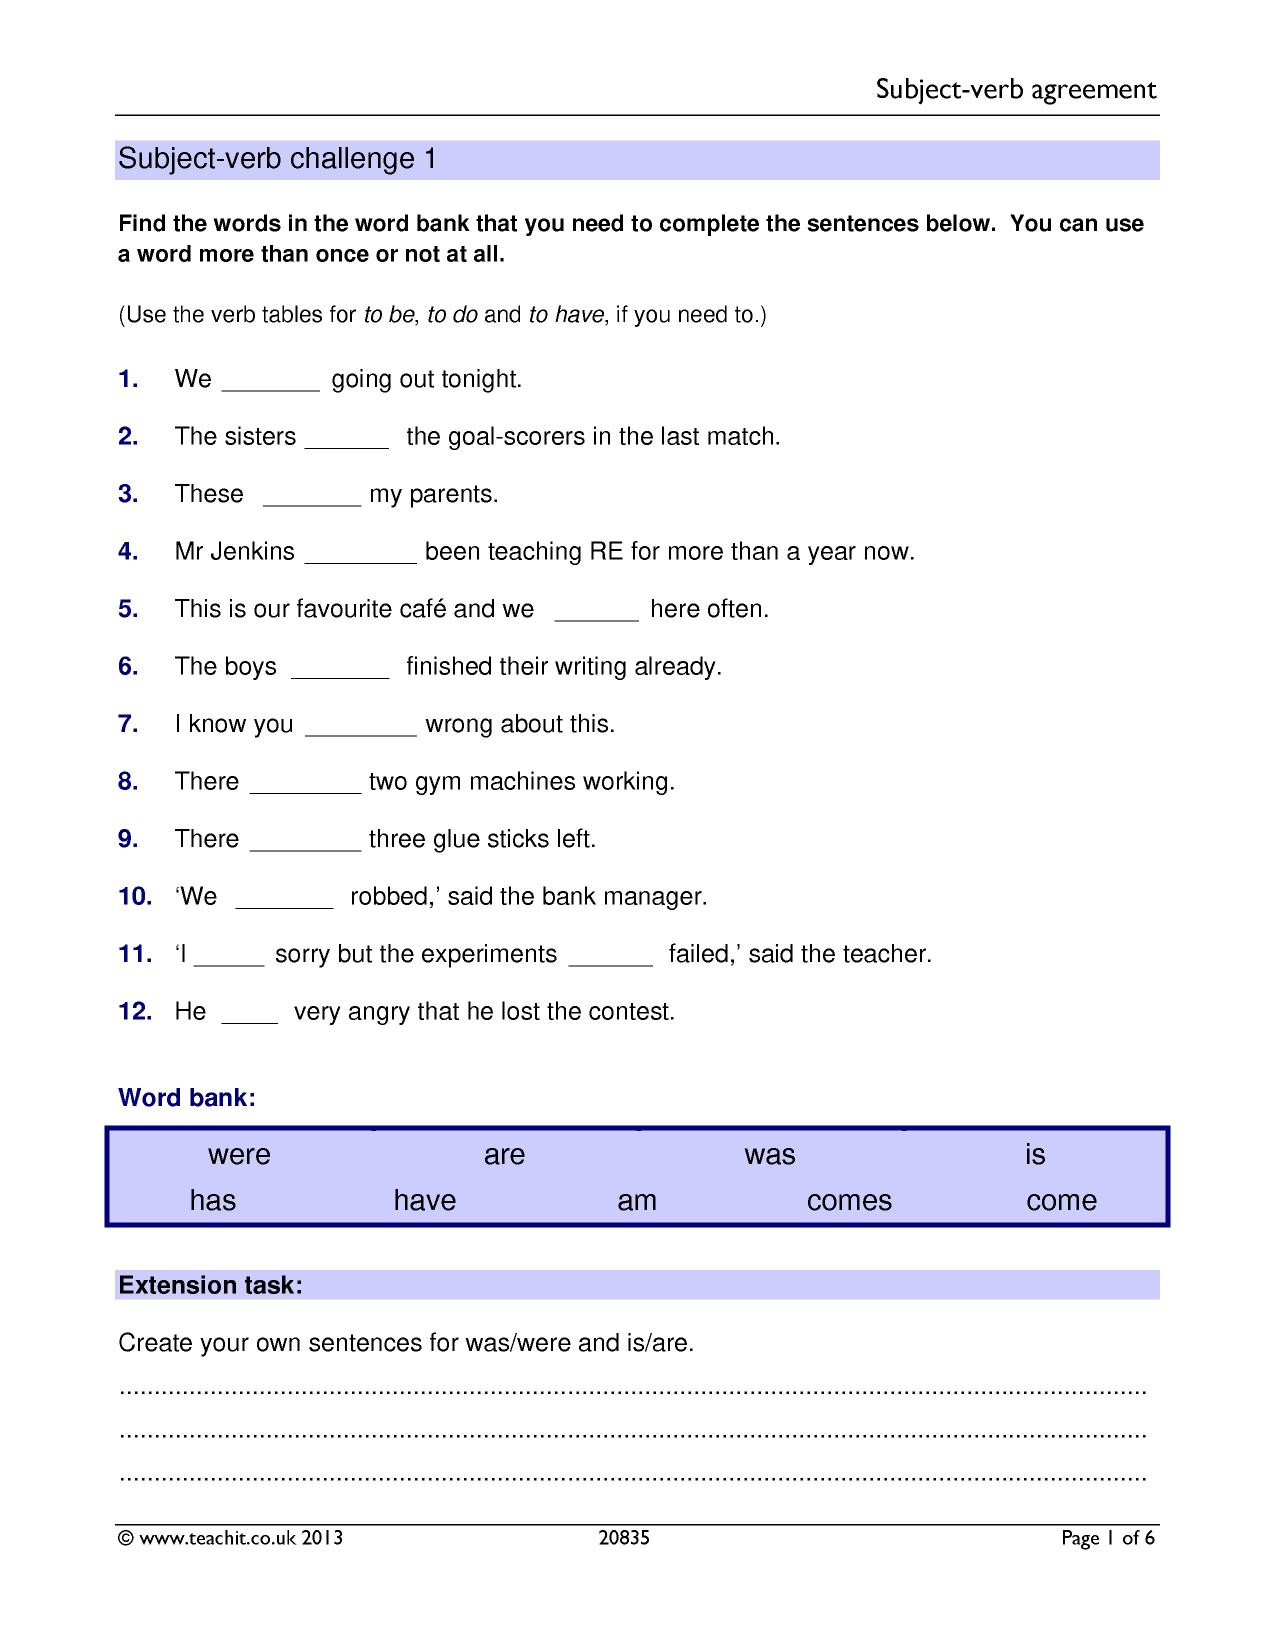 subject-verb-agreement-fill-in-the-blank-worksheet-subject-verb